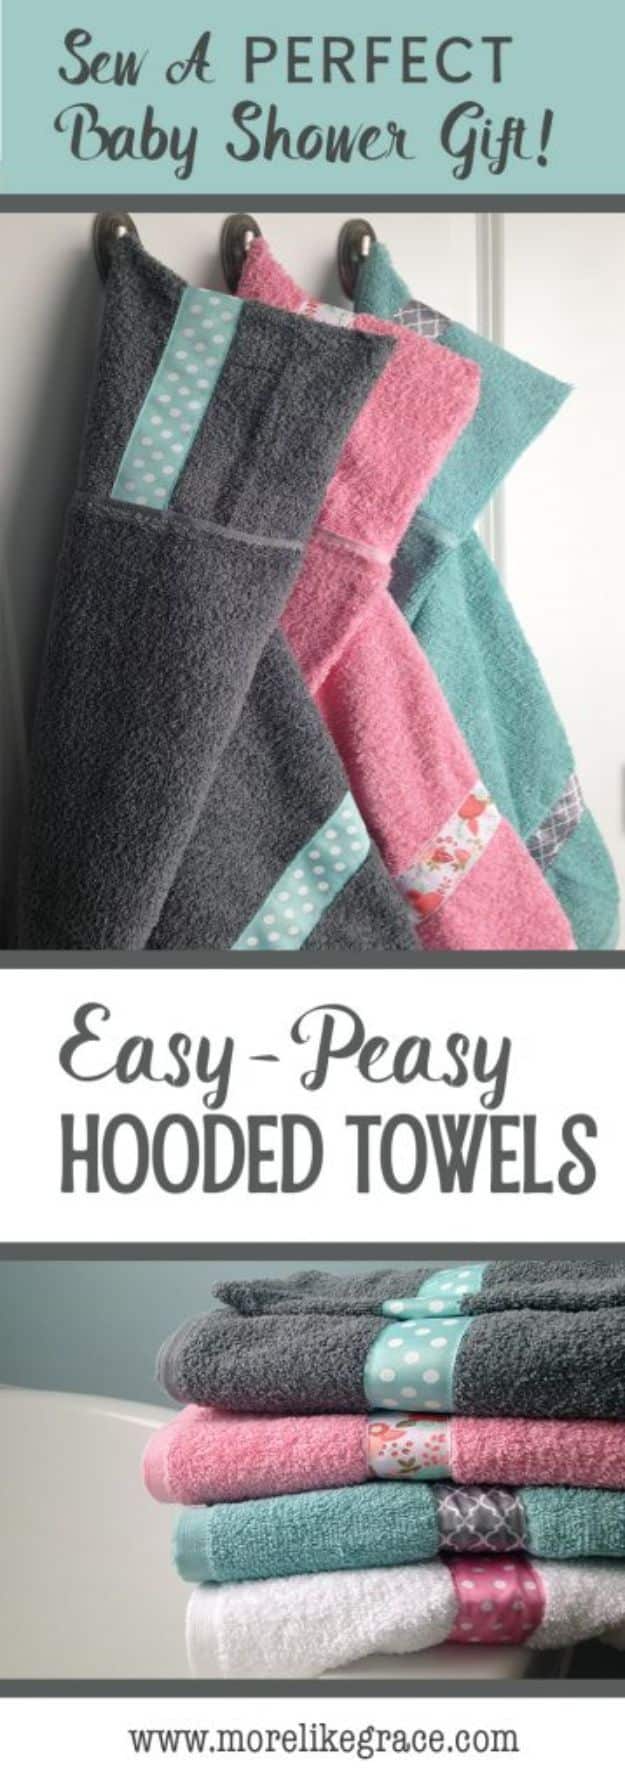 Sewing Projects for Beginners - Easy Peasy Hooded Towels - Easy Sewing Project Ideas and Free Patterns for Basic Clothing, Kids Clothes, Quick Baby Gifts, DIY Bags, Sewing Crafts to Make and Sell on Etsy - Scarf Tutorial, Blankets, Stuffed Animals, Home Decor and Linens, Curtains and Bedding, Hand Sewn cute christmas gifts to sew 